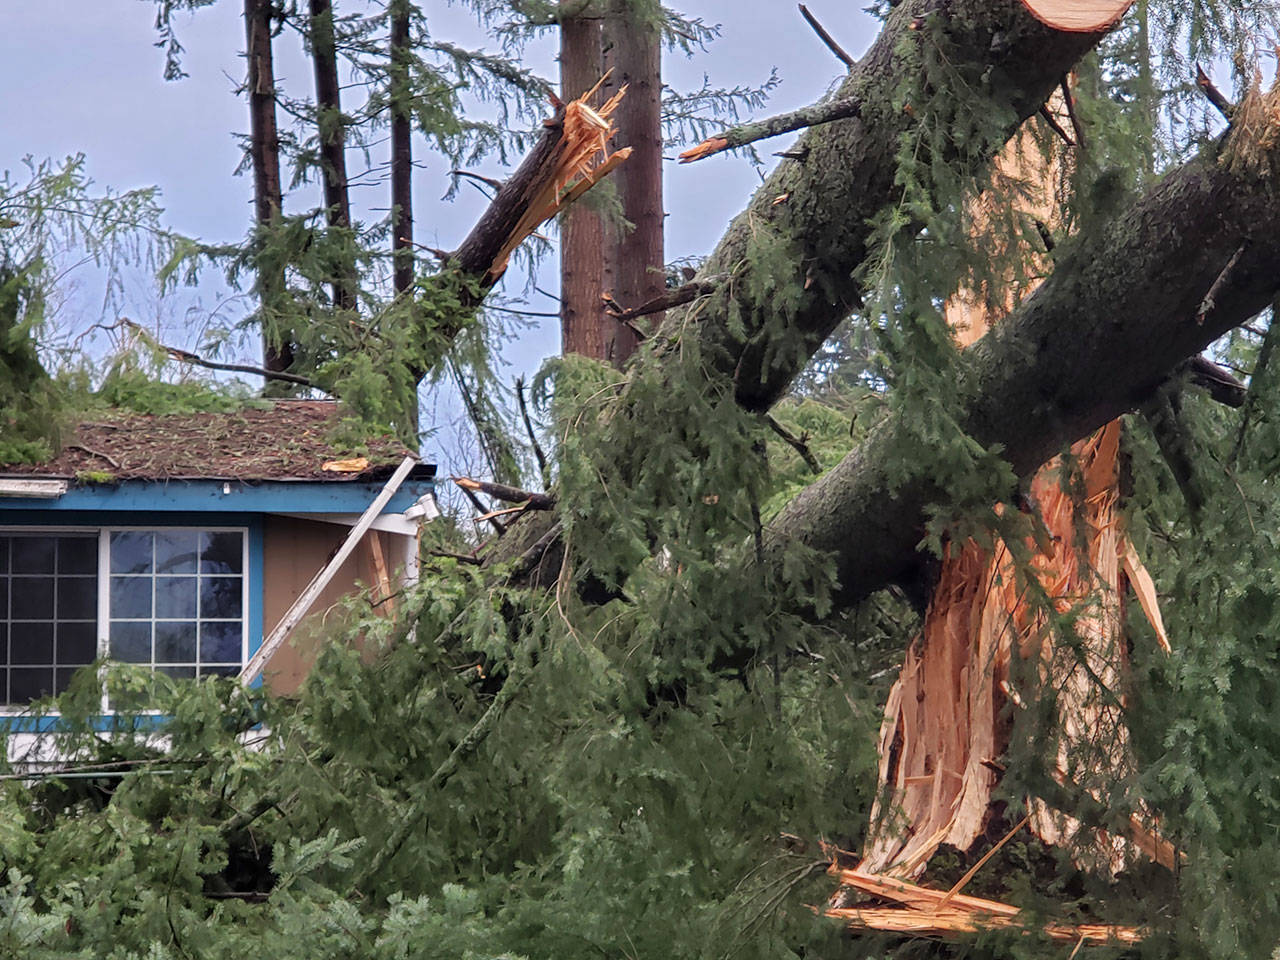 A coordinated emergency response command center has ended operations assisting and assessing the after-effects from the EF-2 tornado that struck Port Orchard Dec. 18. Coordination work now falls to the Kitsap County Department of Emergency Management. (Robert Zollna | Kitsap Daily News)